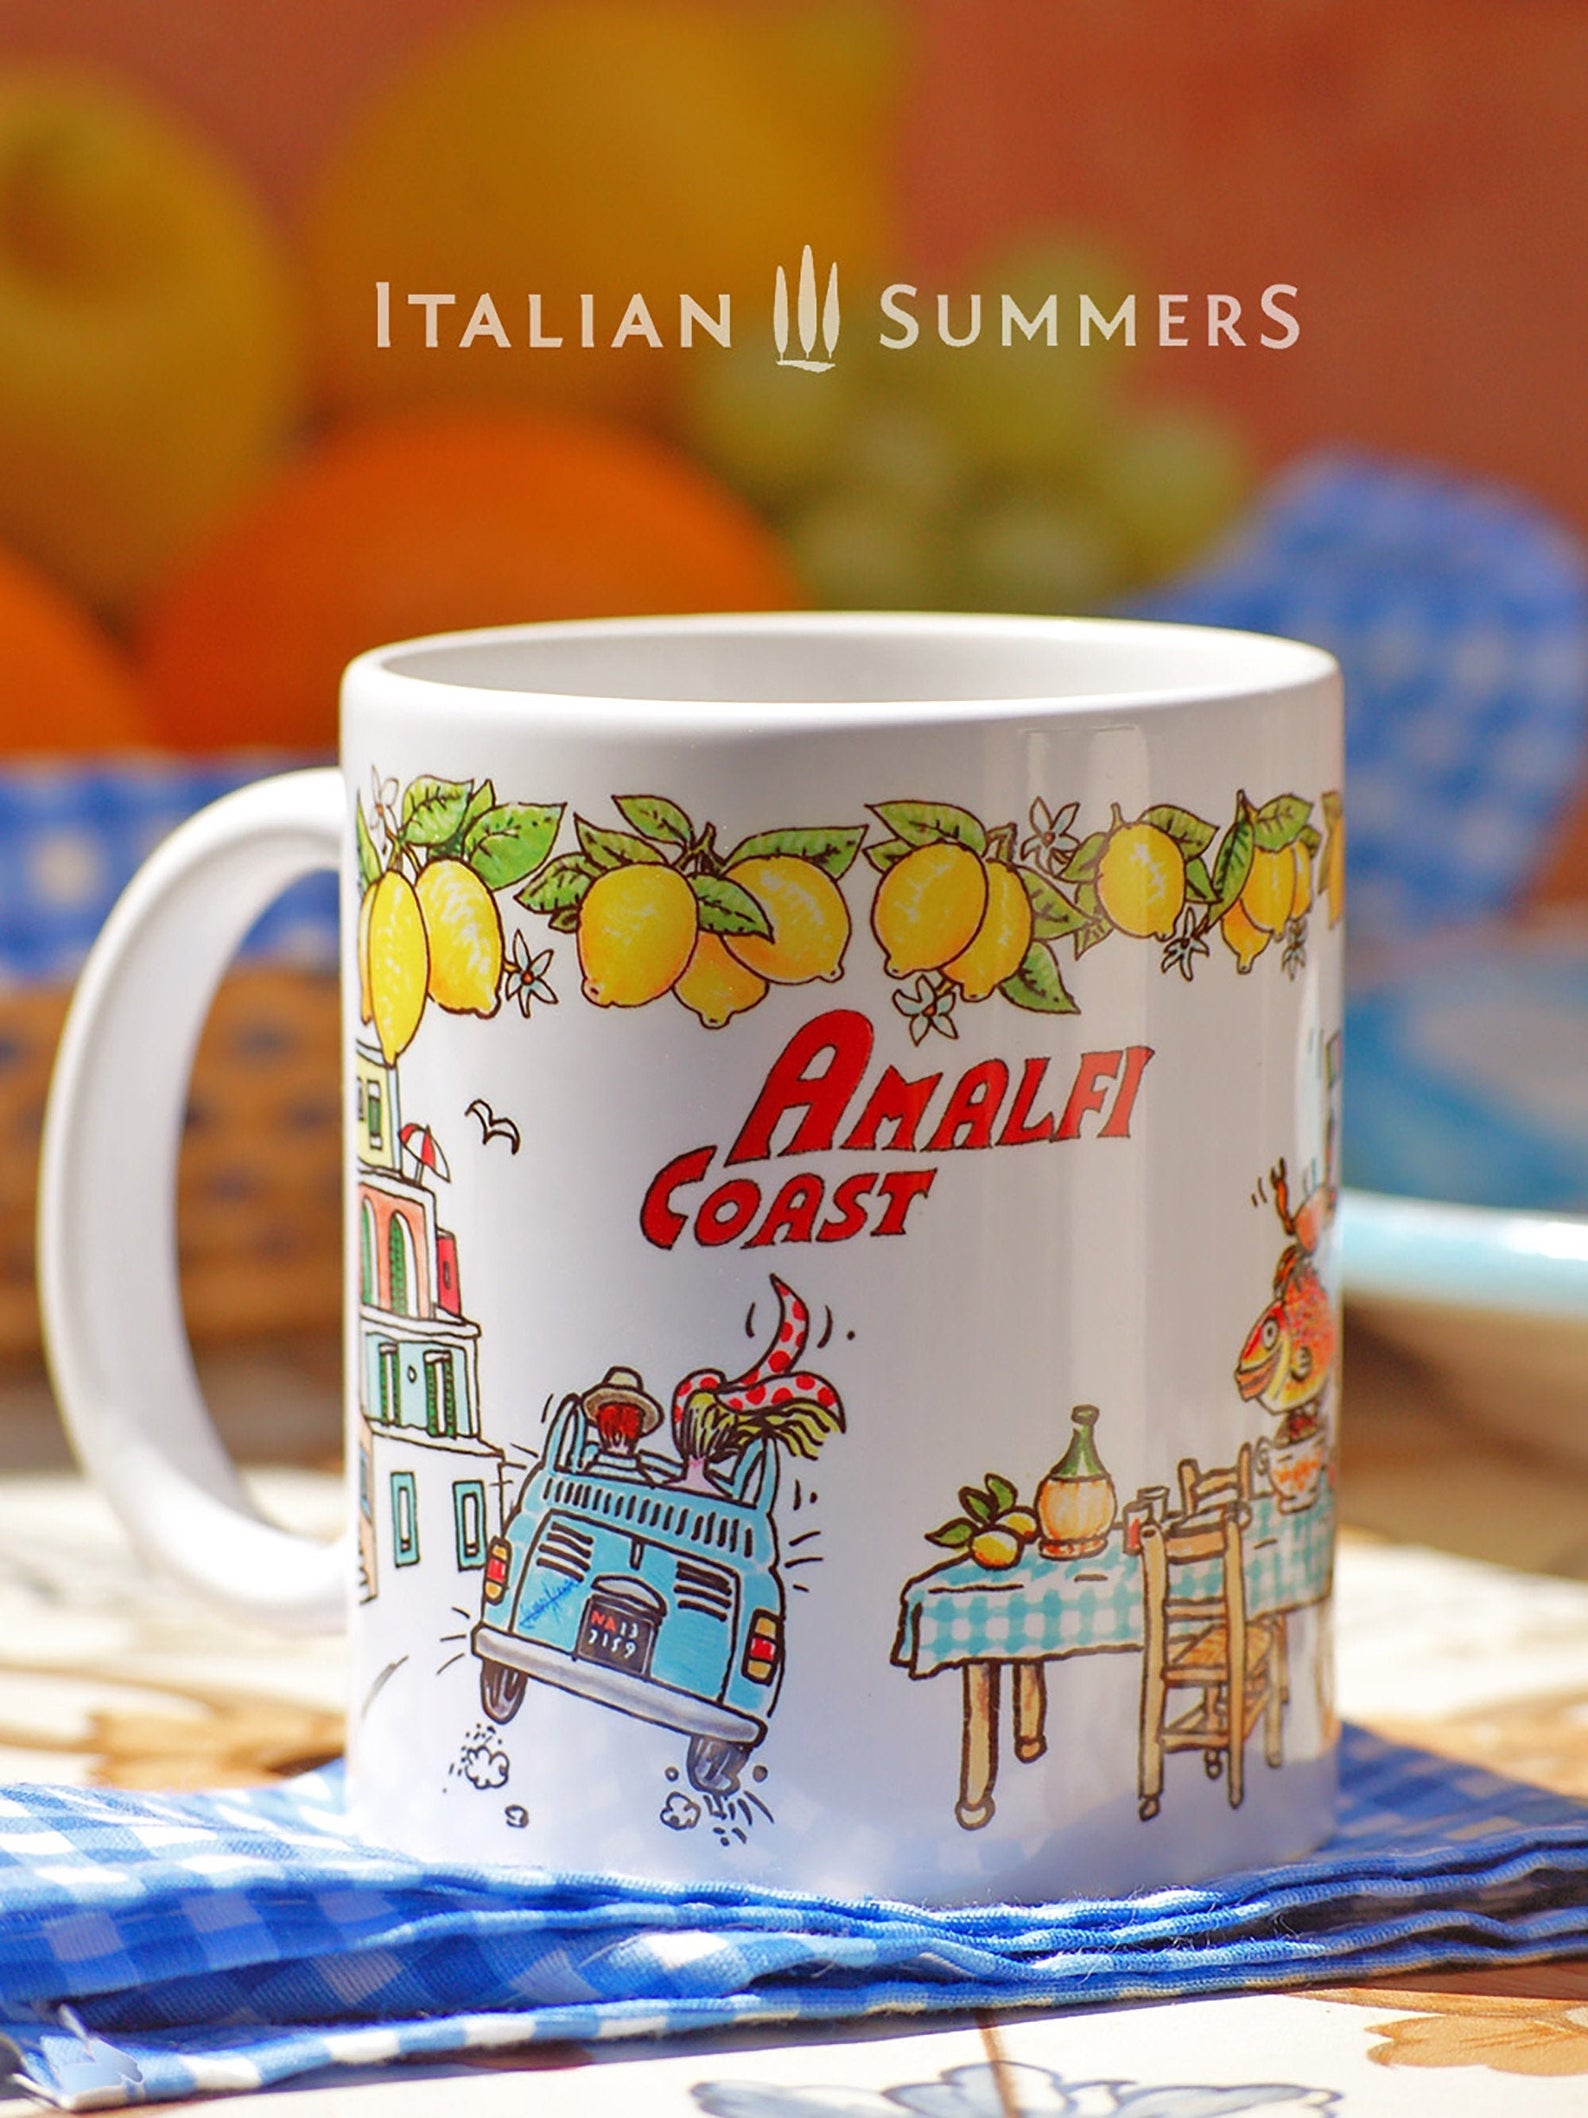 Italy | Amalfi Coast inspired mug with sketches that refer to the Amalfi Coast | Positano. There is a light blue vintage Cinquecento cabrio with a man and a woman seen from the back, the colorful houses of the Amalfi coast, a long table with a blue checkered table cloth, lemons, wine, a smiling fish and a crab with an Italian flag. On the rim there is a lemon garland and in the middle the red writing Amalfi coast. A really happy mug! Made by Italian Summers.